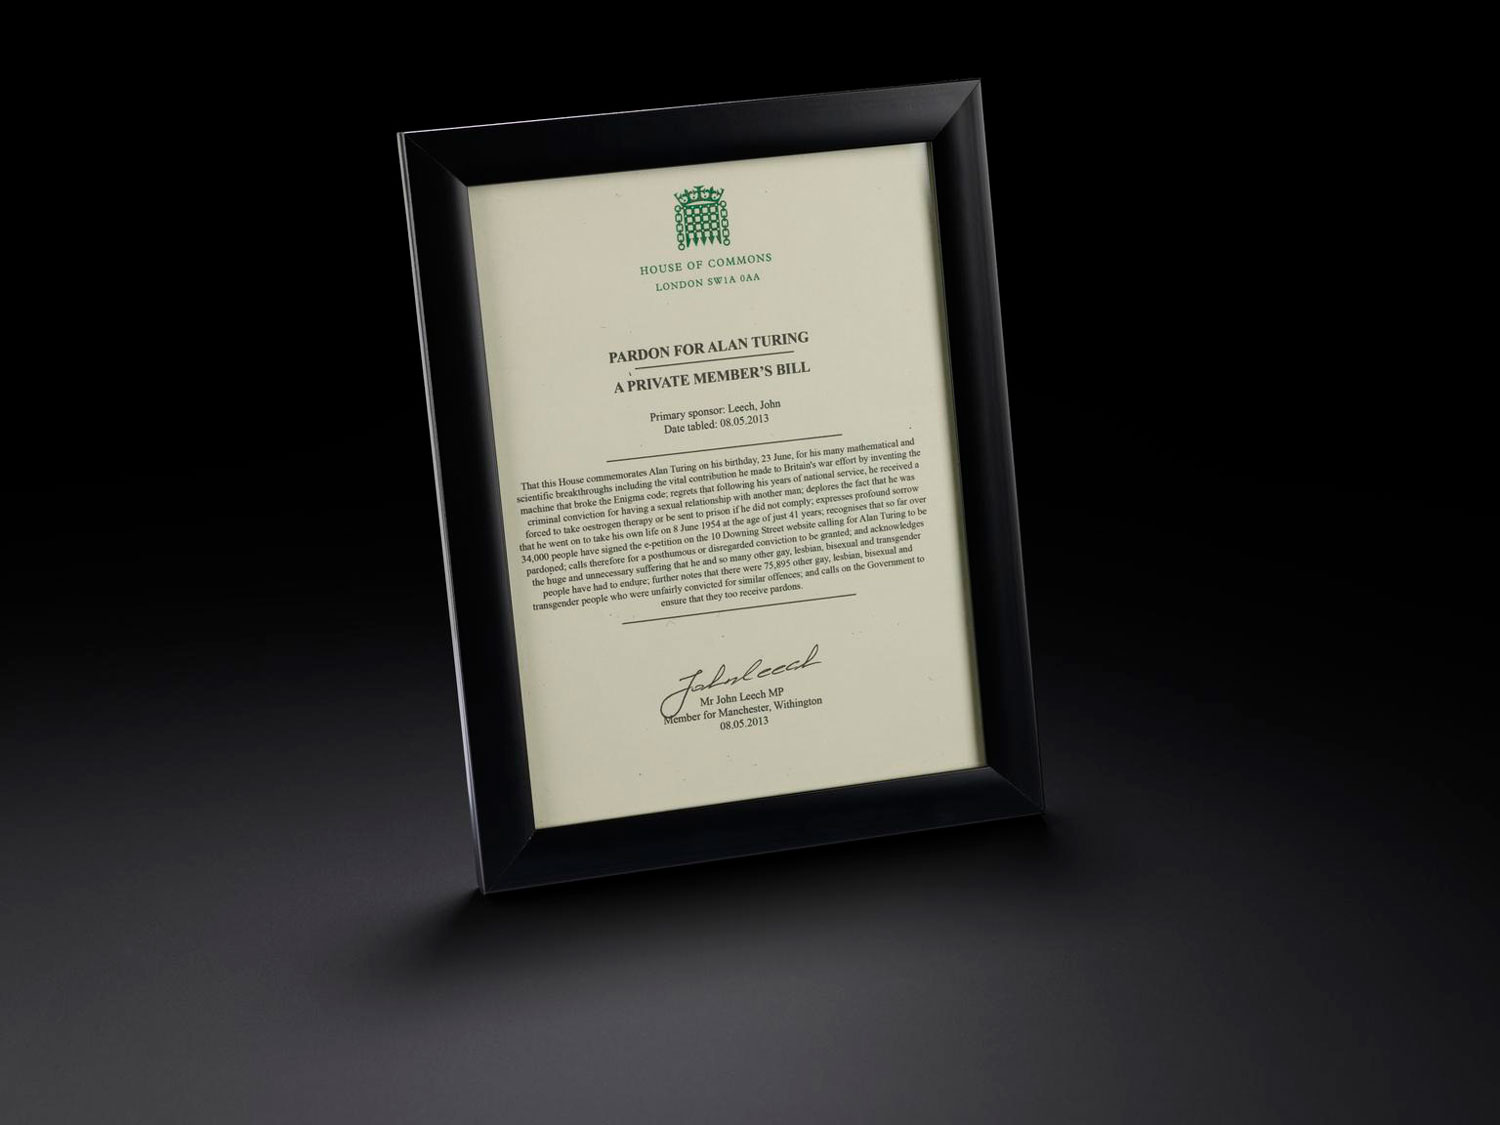 A framed letter from the House of Commons